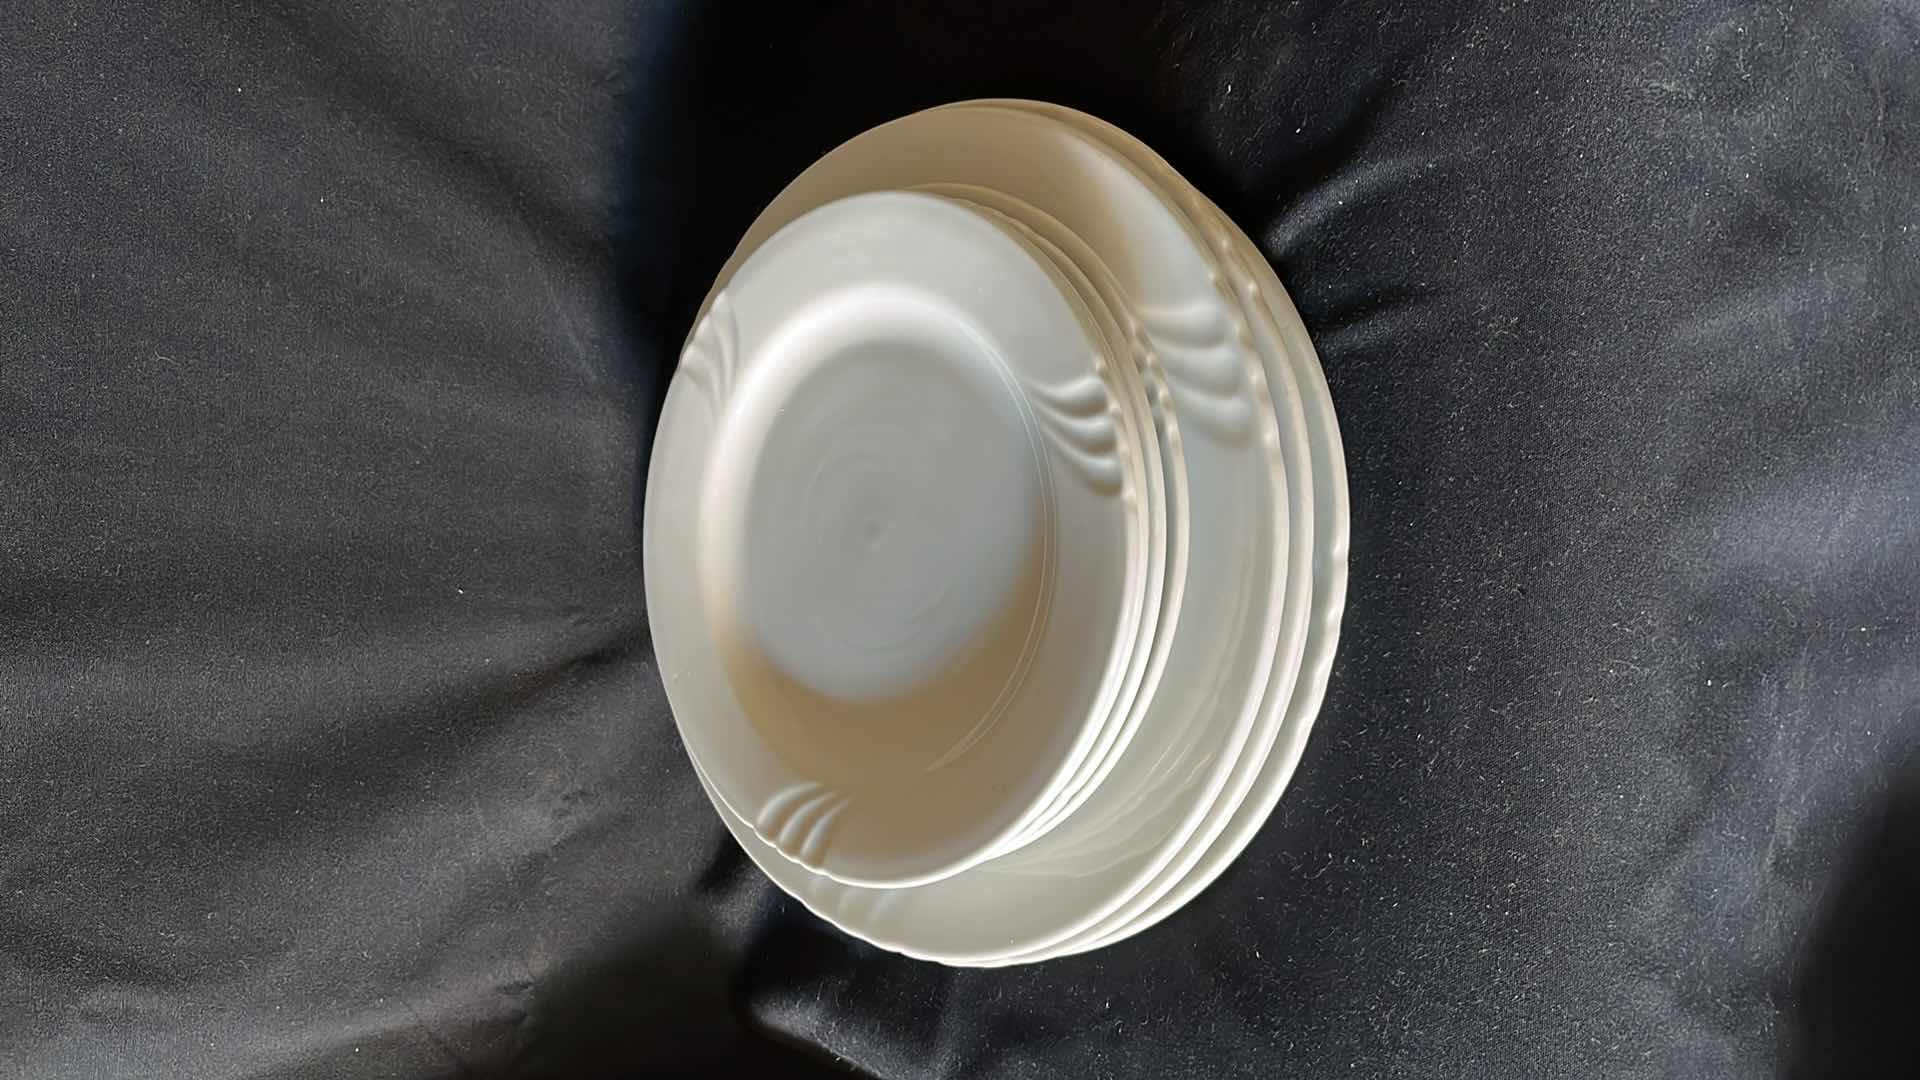 Photo 2 of BRIANA REGO FINE PORCELAIN DINNER PLATES AND SALAD PLATES (SETS OF 4)